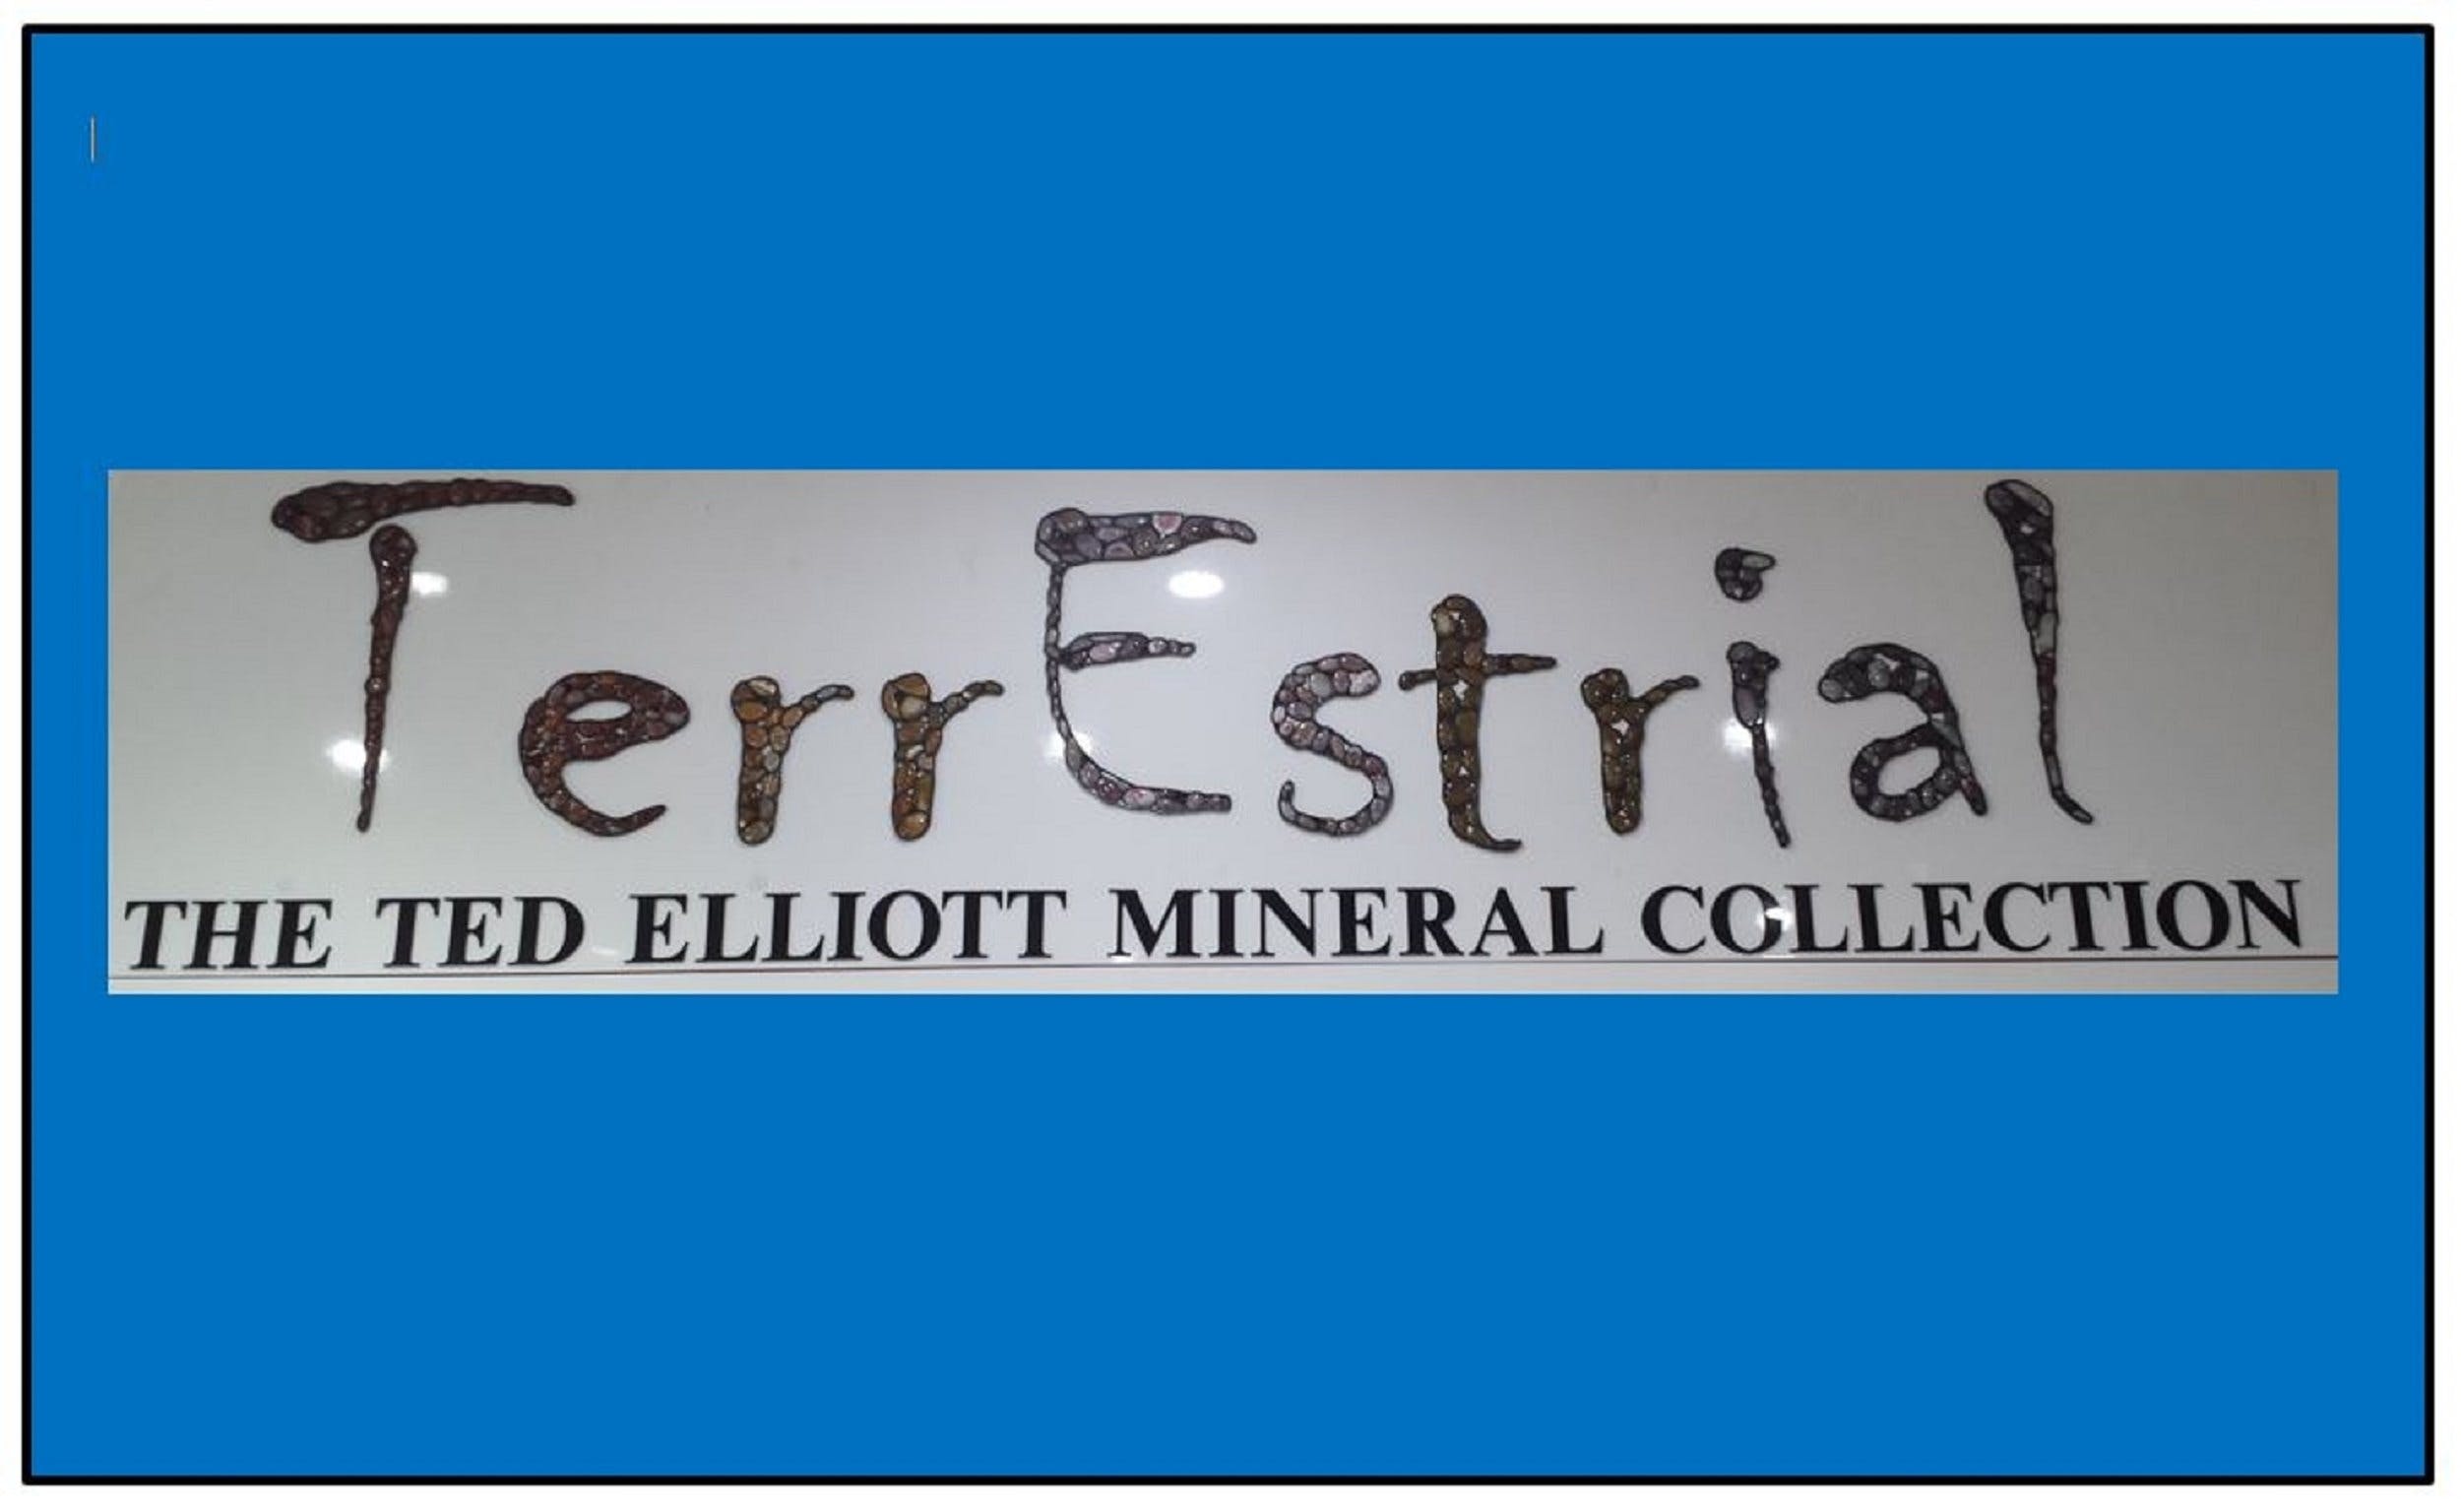 The Ted Elliott Mineral Collection - Redcliffe Tourism